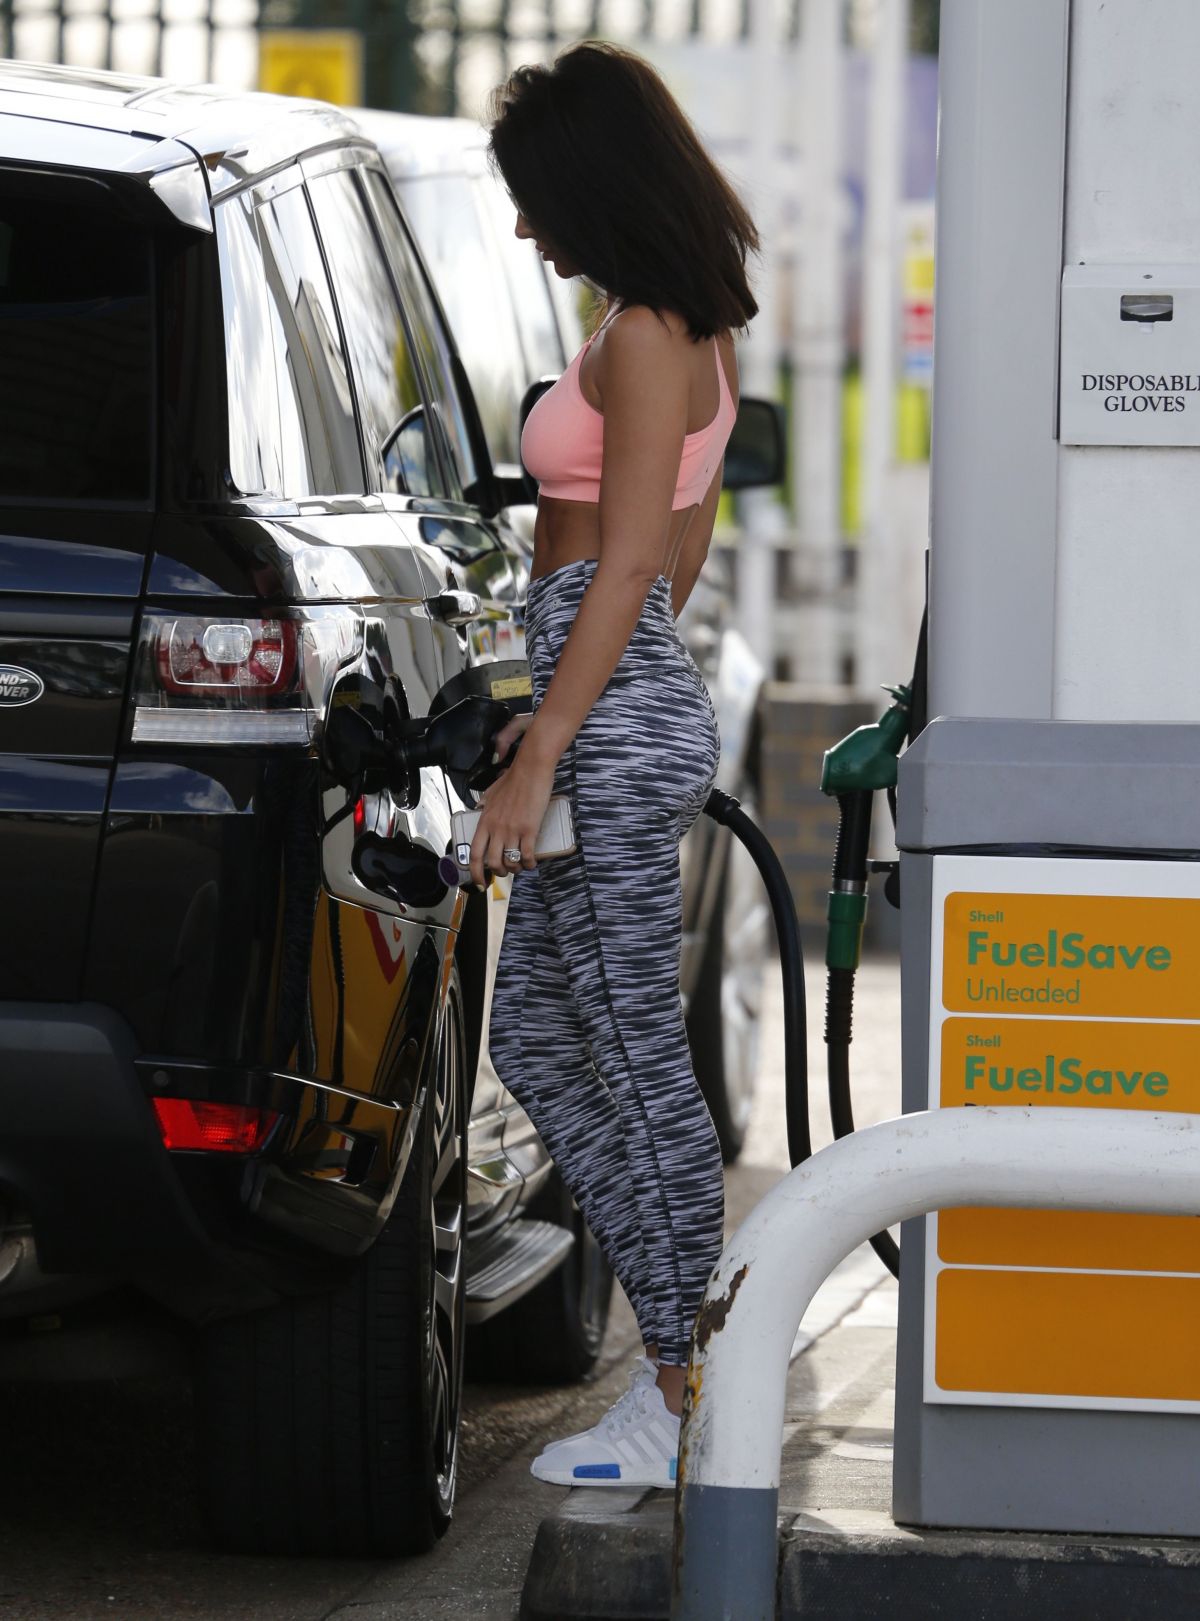 Michelle keegan gas pump and has great ass
 #79573918